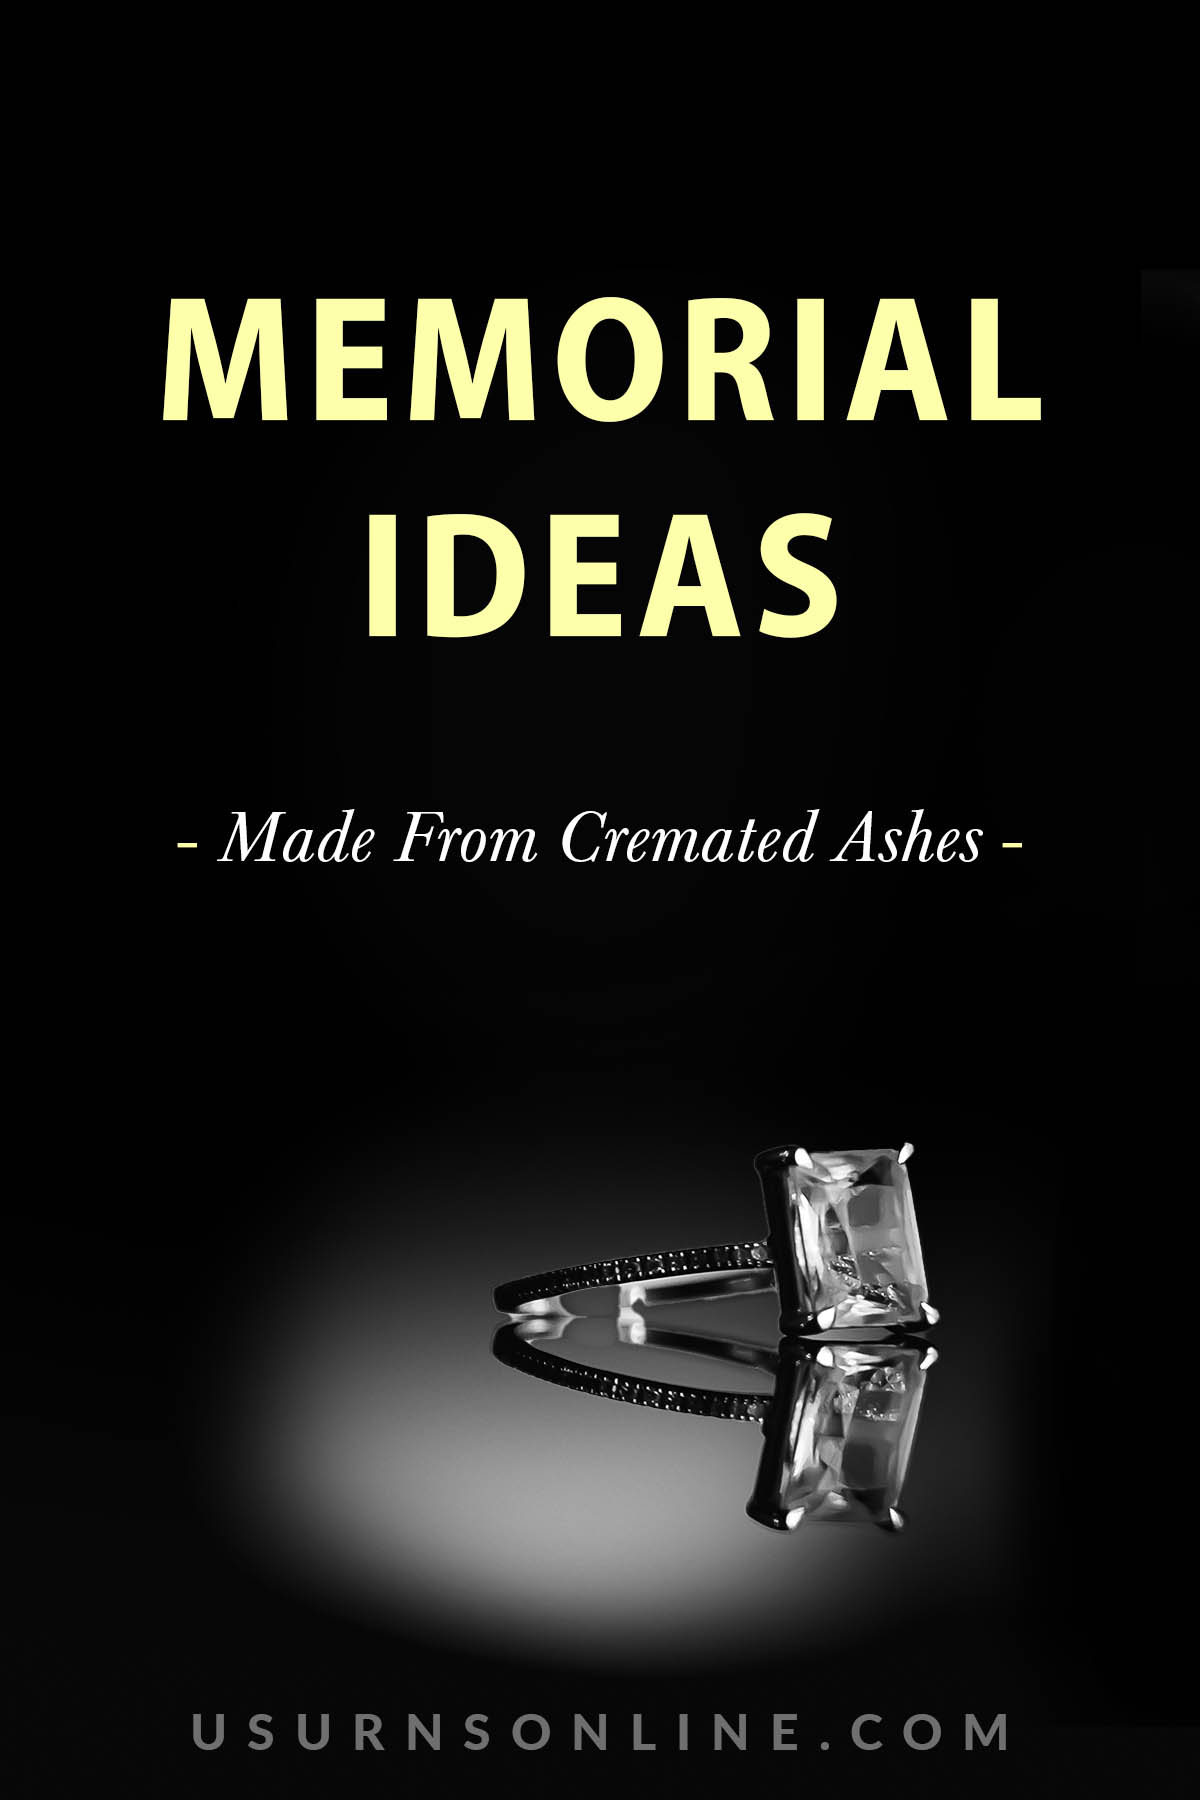 memorial ideas with cremated ashes - feature image